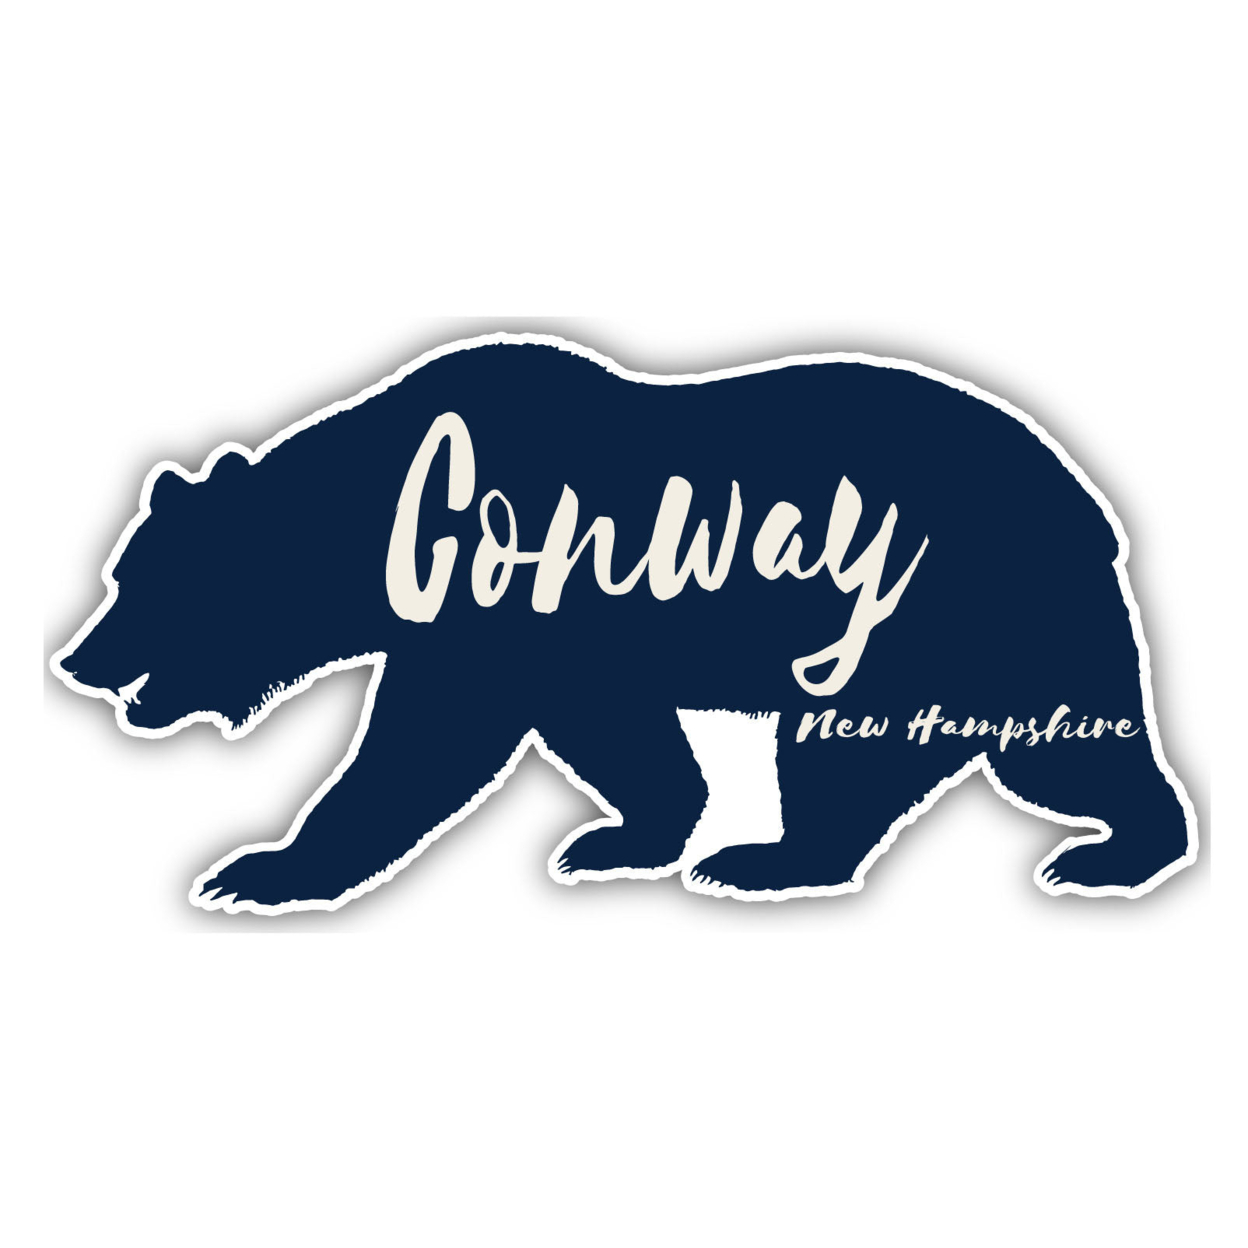 Conway New Hampshire Souvenir Decorative Stickers (Choose Theme And Size) - Single Unit, 8-Inch, Bear